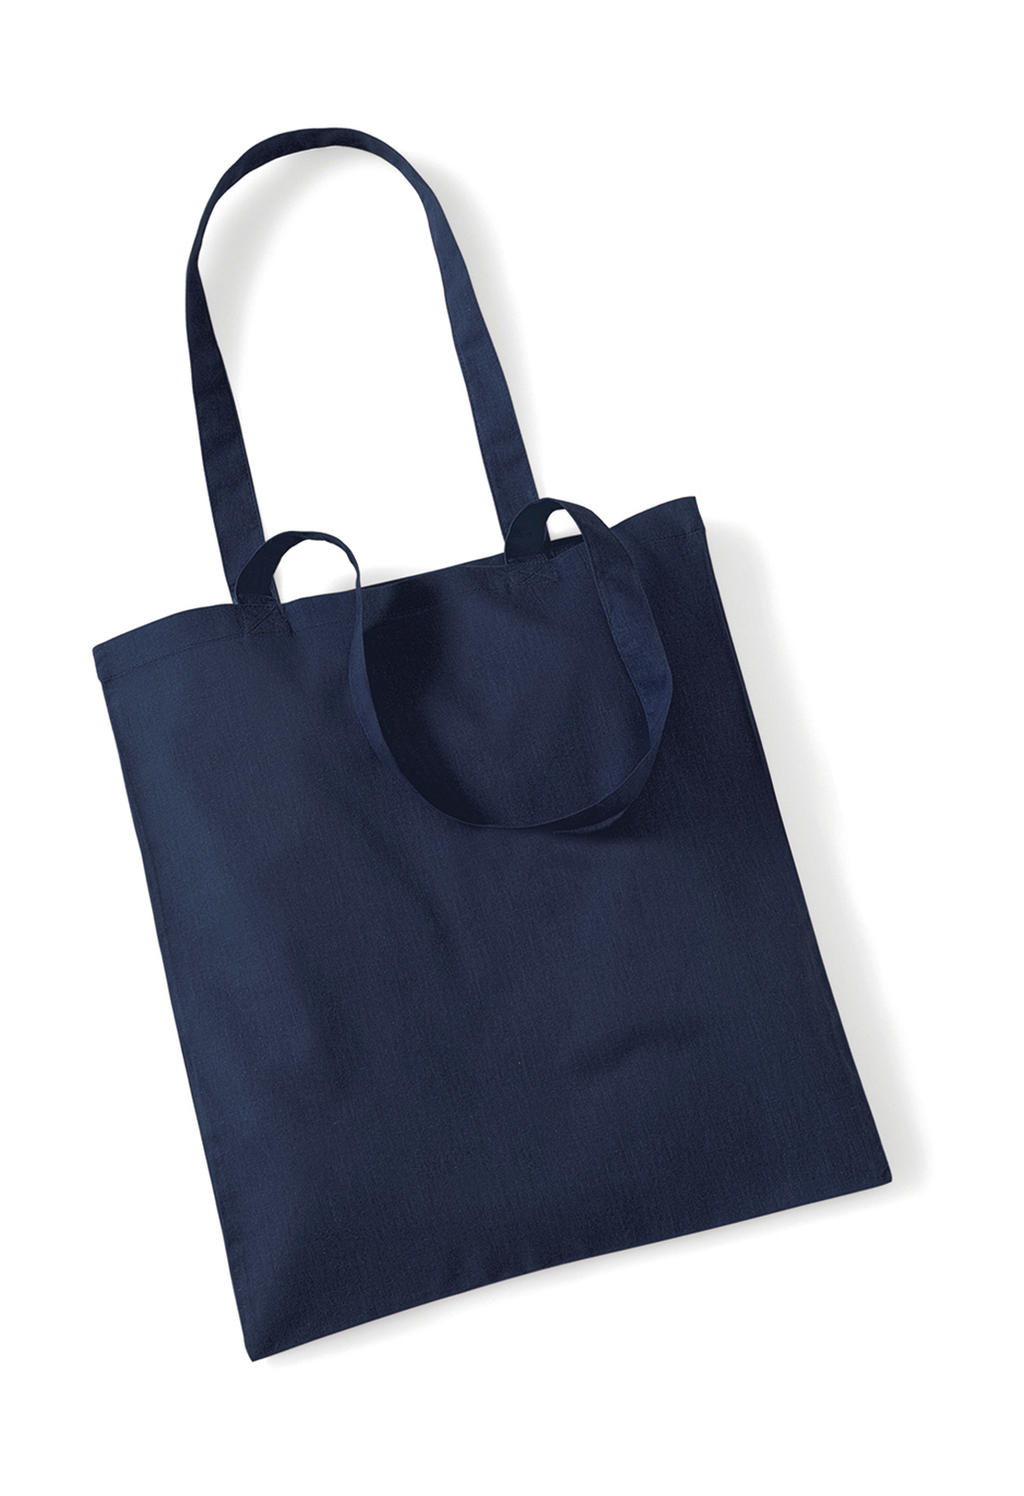 Bag for Life - Long Handles - french navy